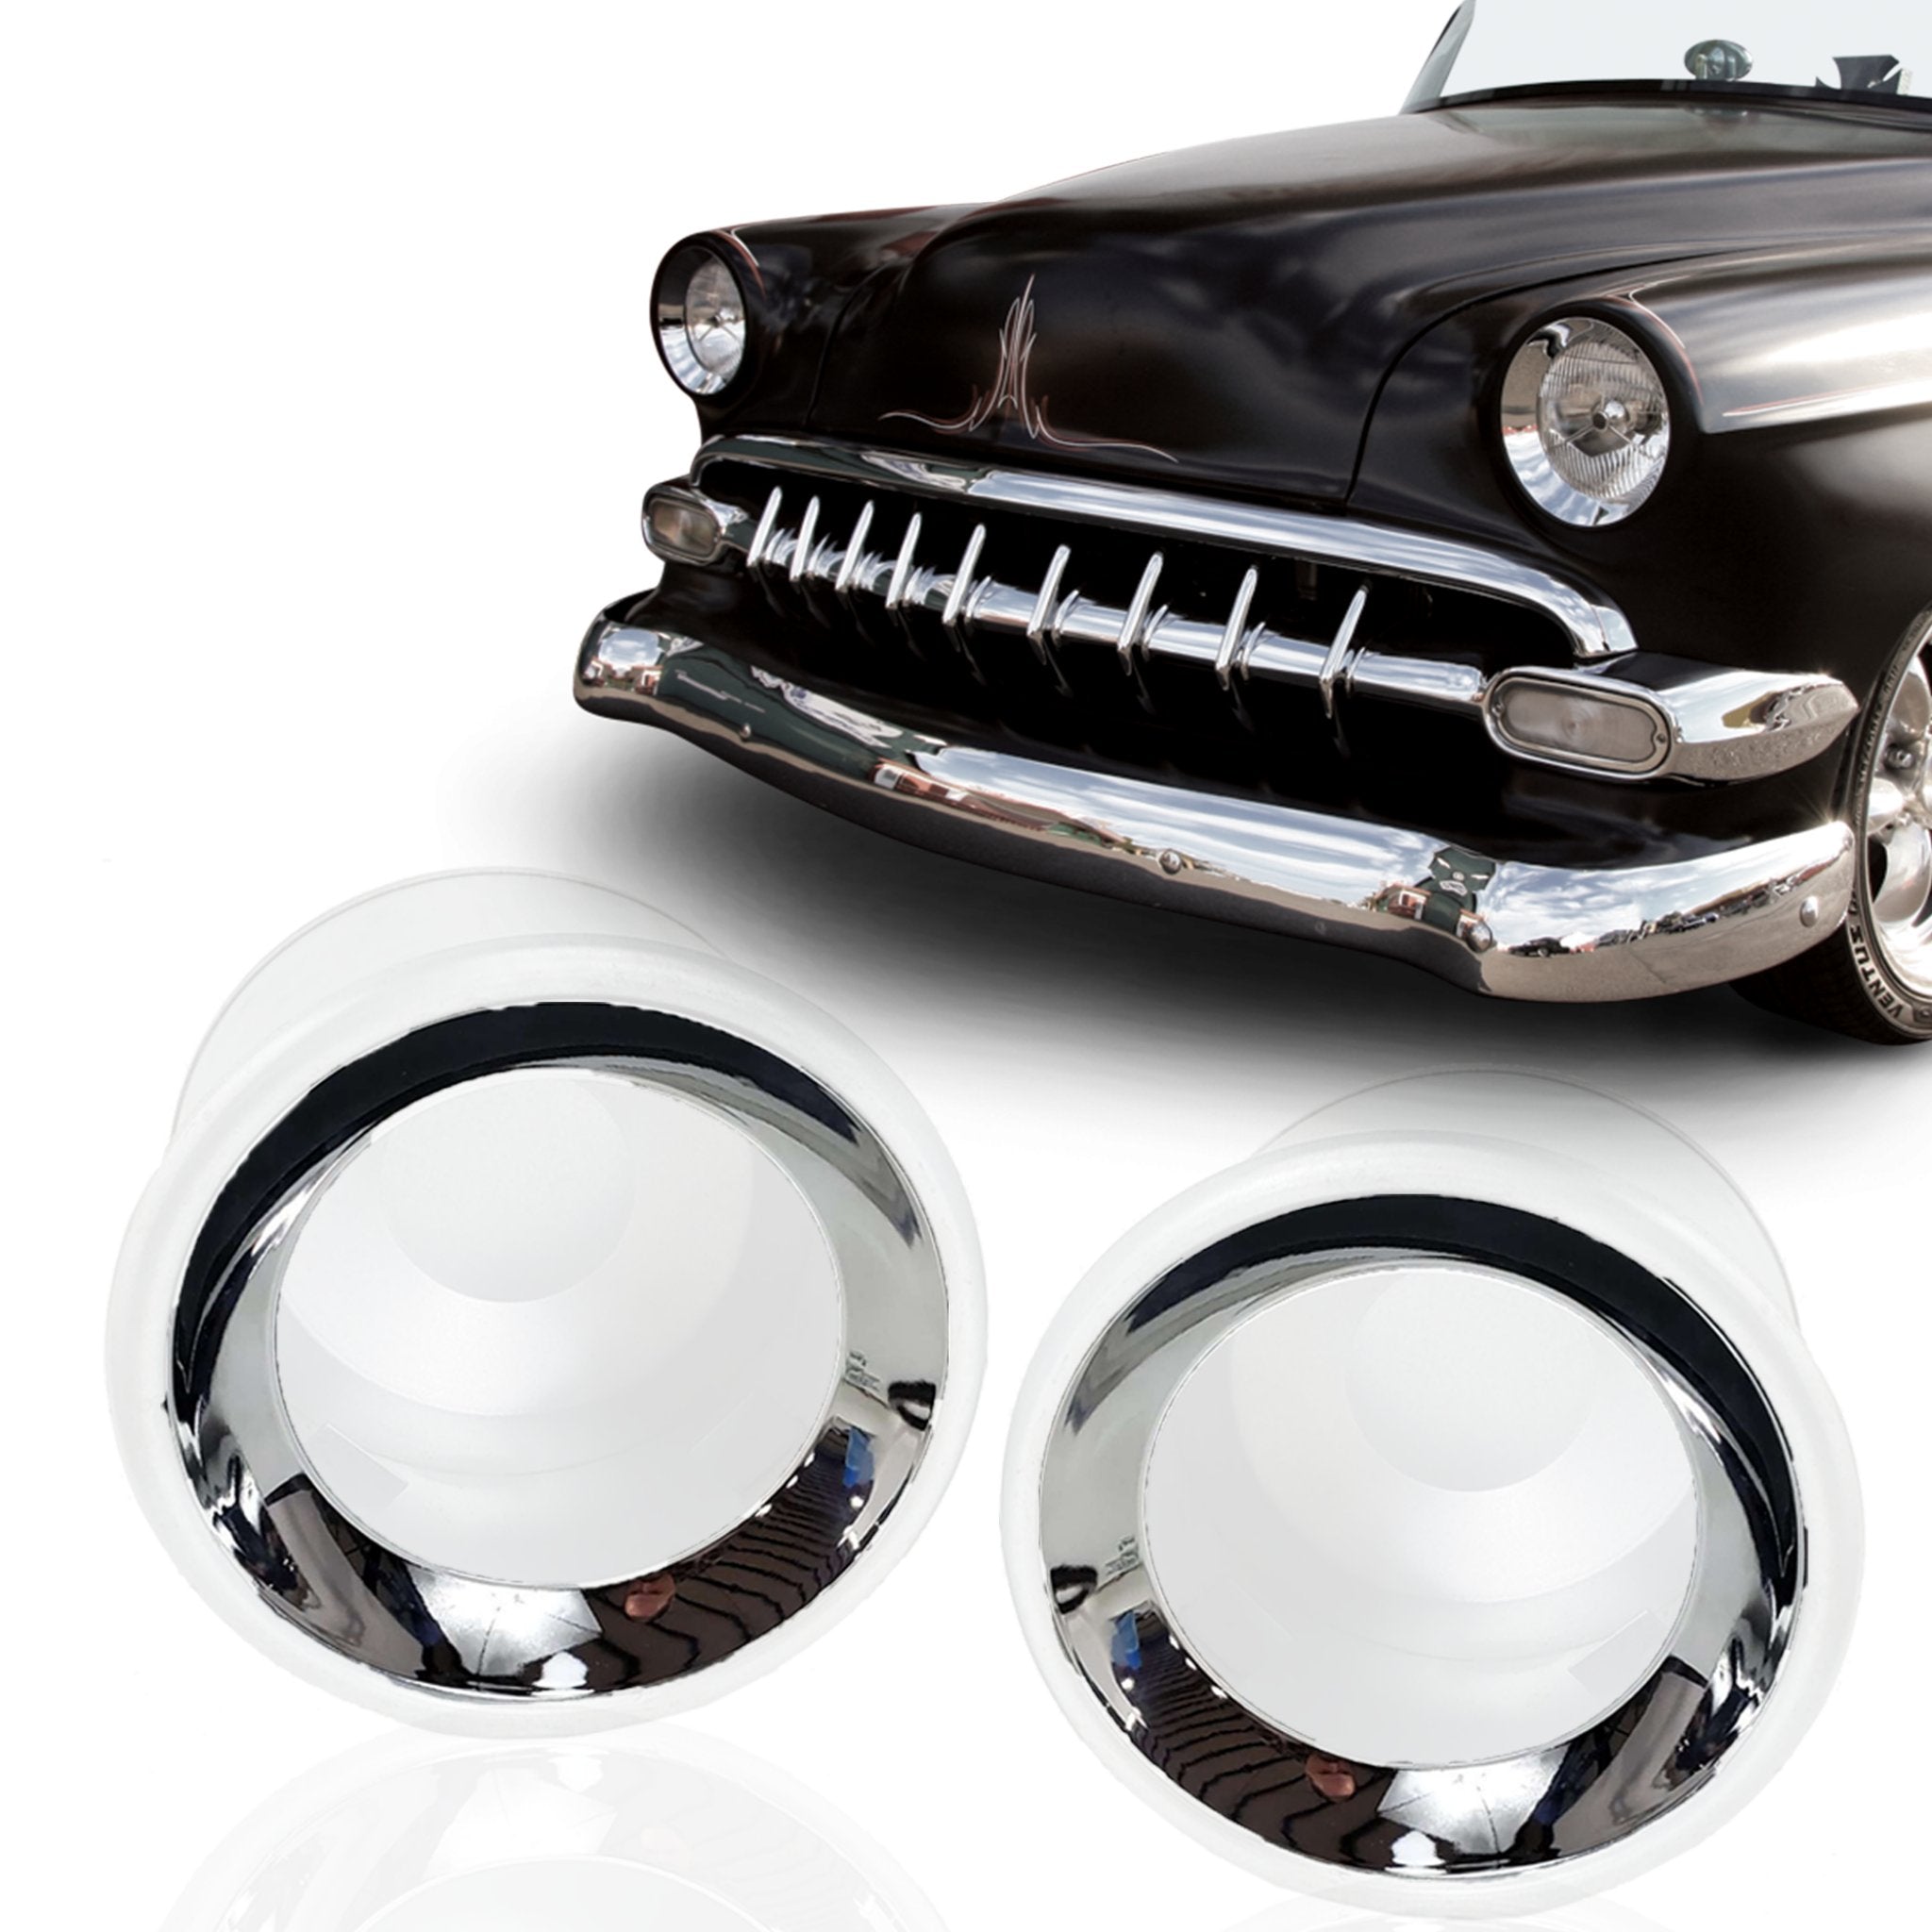 Recessed Frenched Headlight Chrome Trim Ring Pair 7" Flush Mount Bucket Bezel